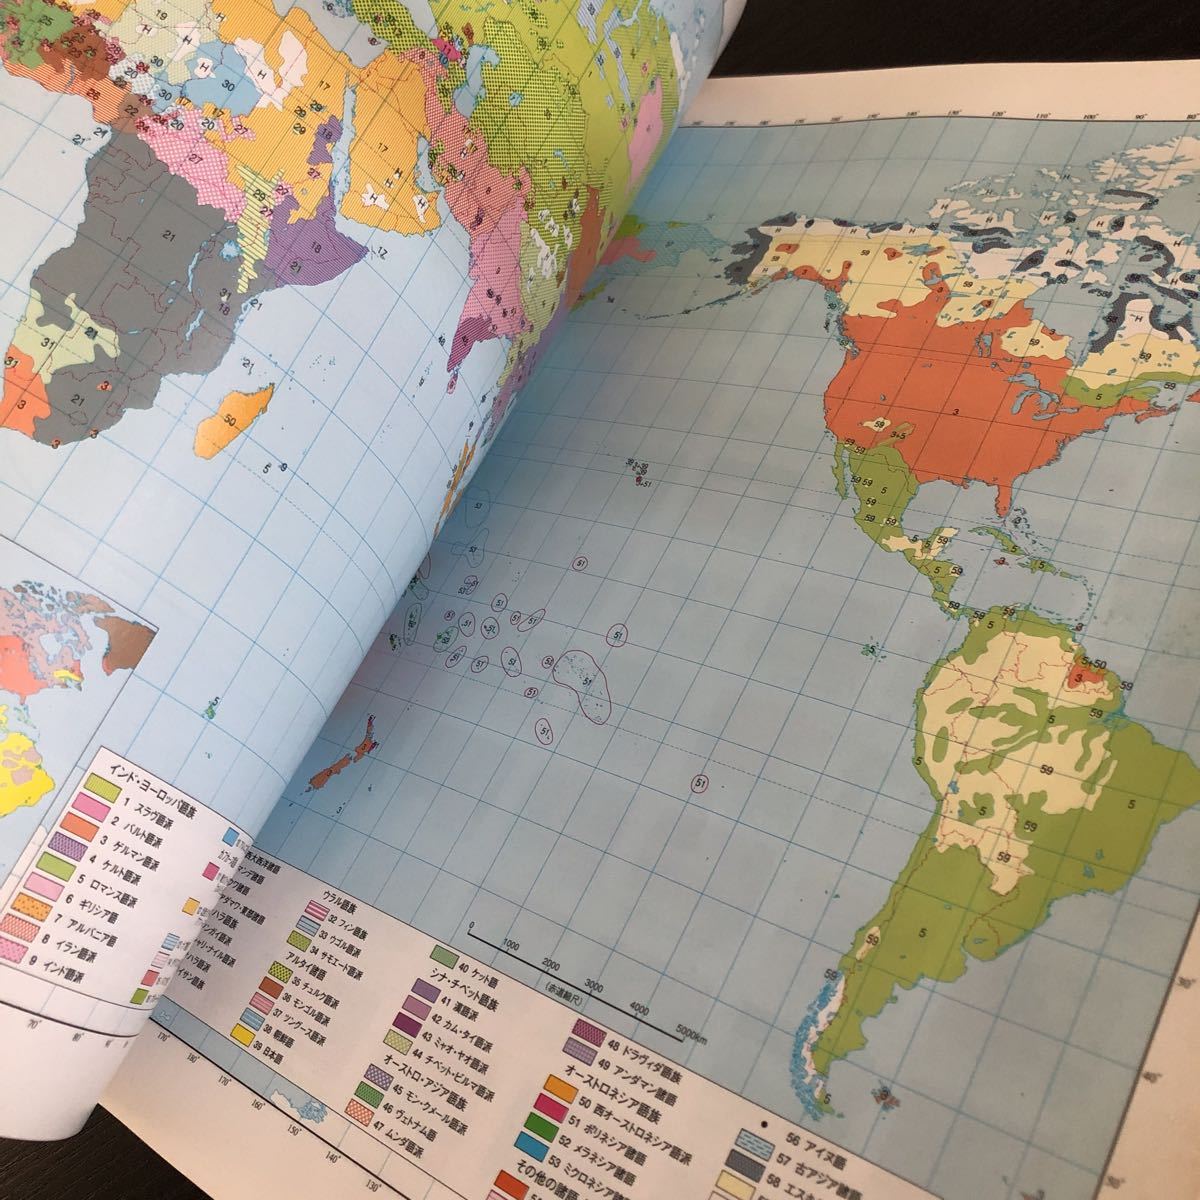 li2 world map 2000 year 7 month issue international geography association tourist attraction detail plan travel map Japan place name retro old Showa era valuable road map foreign traveling abroad traffic 